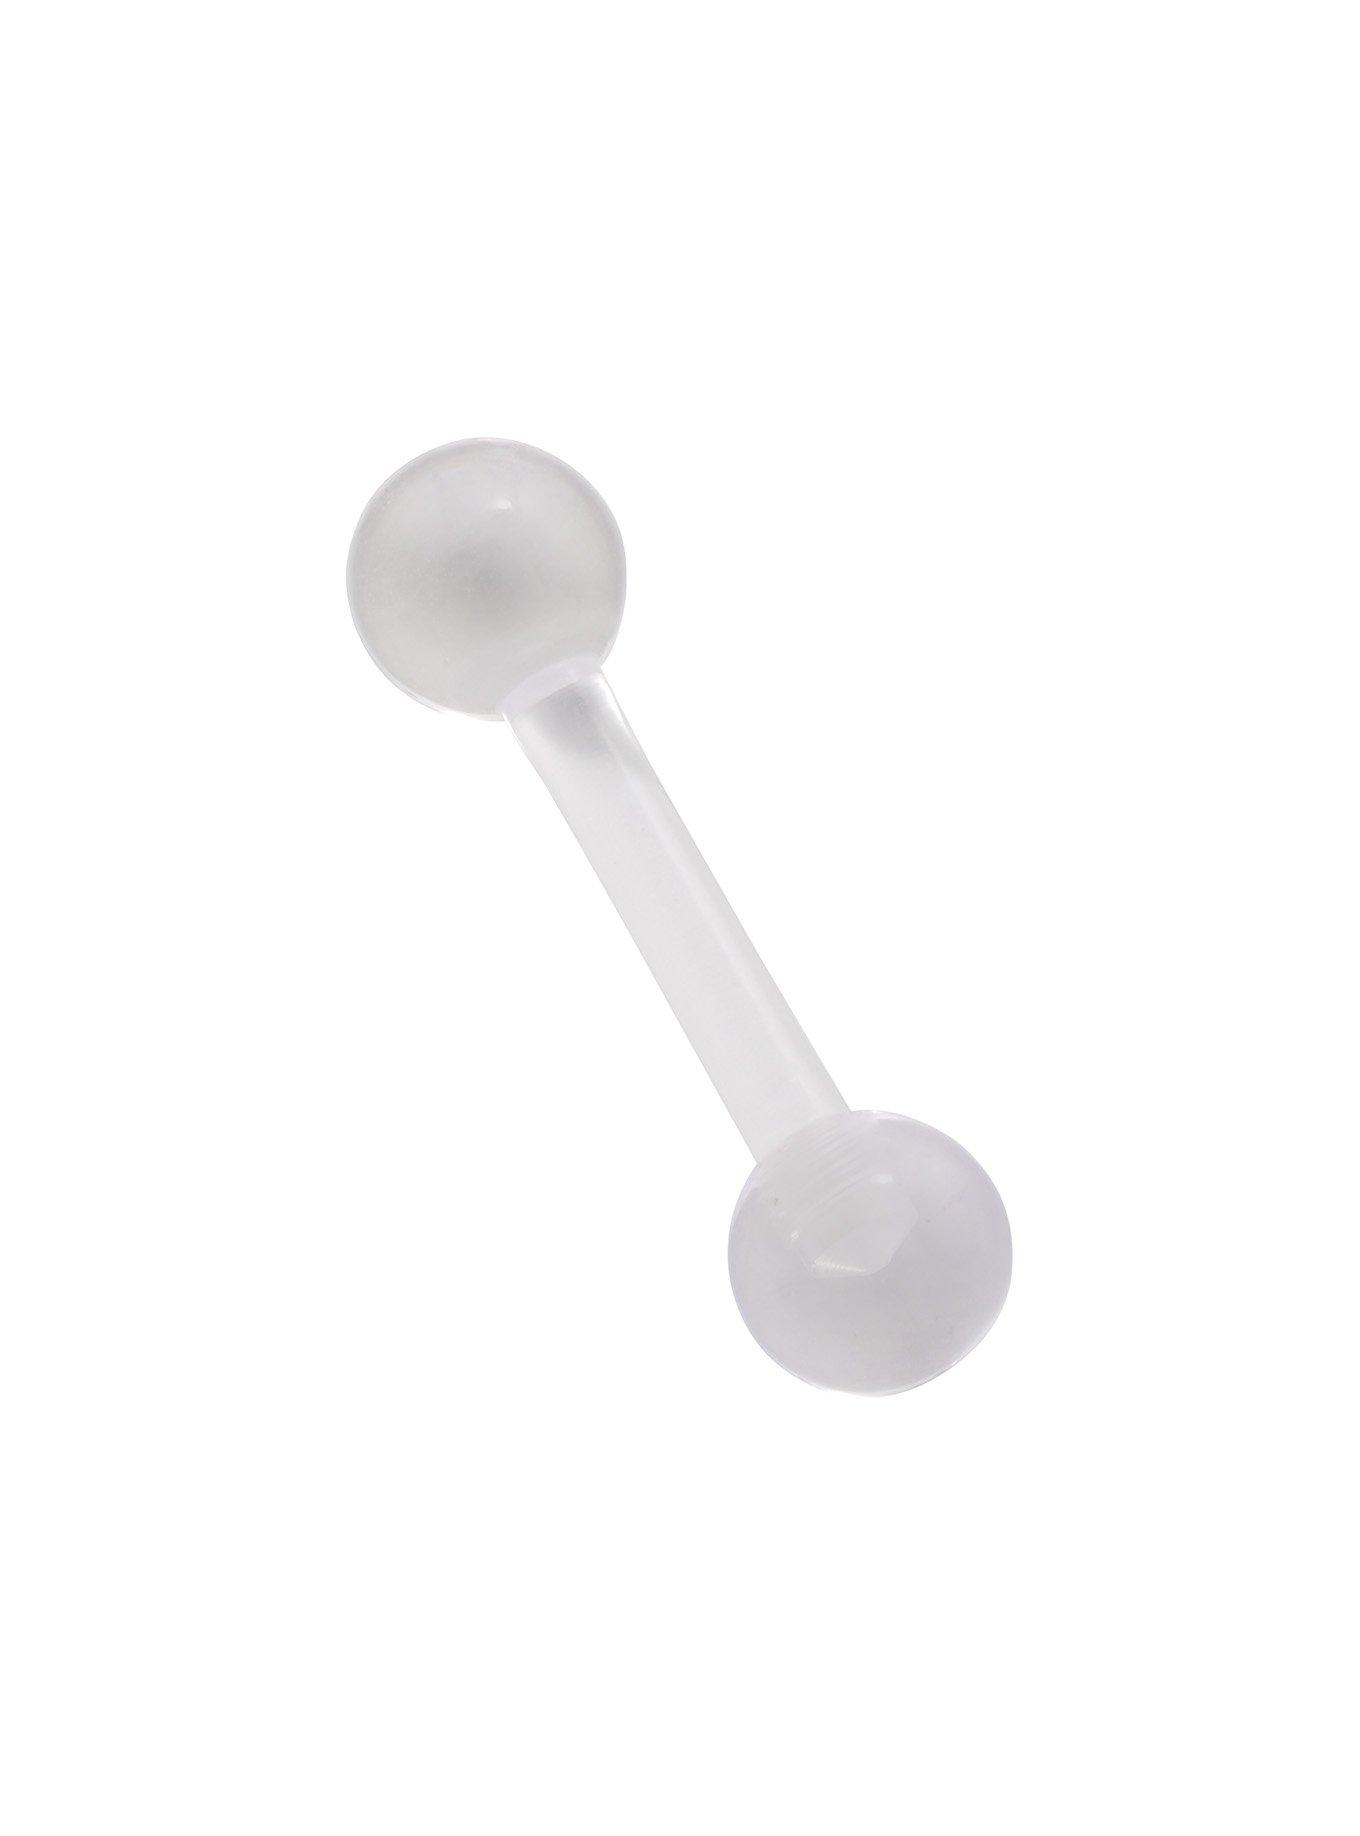 8G Clear Acrylic Barbell, CLEAR, hi-res